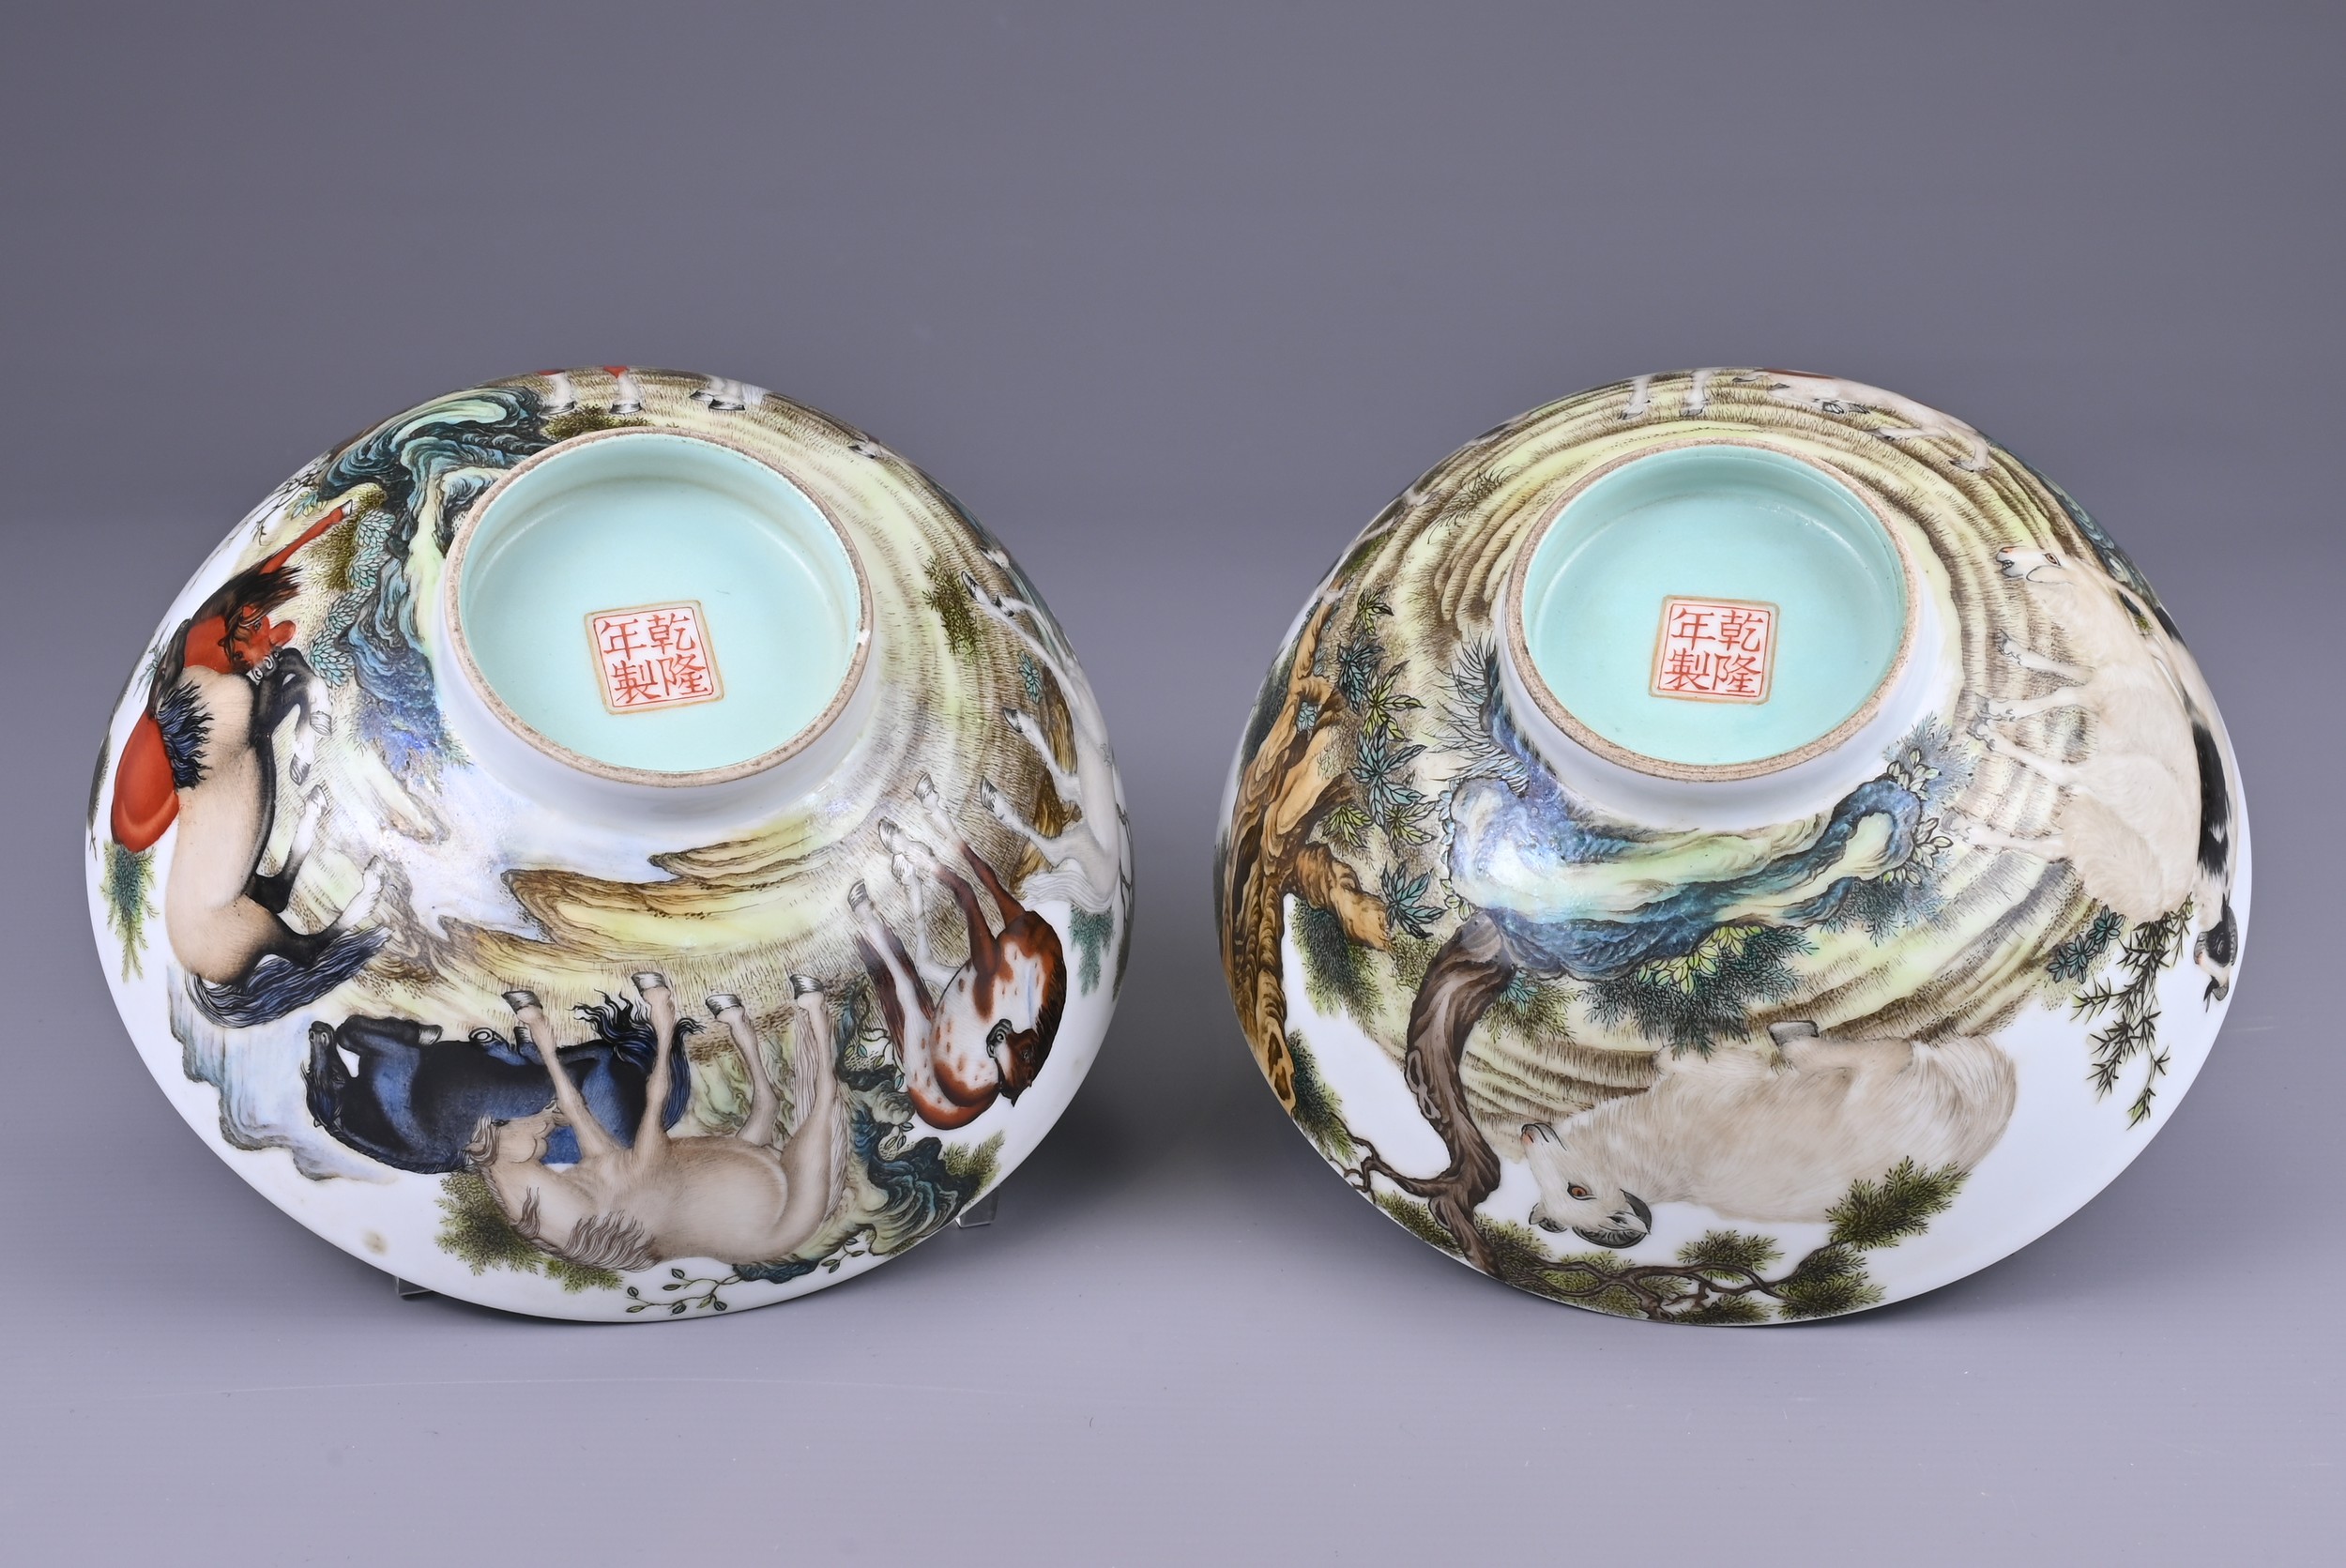 TWO CHINESE PORCELAIN BOWLS, 20TH CENTURY . Each with apocryphal four character Qianlong seal mark - Image 4 of 9